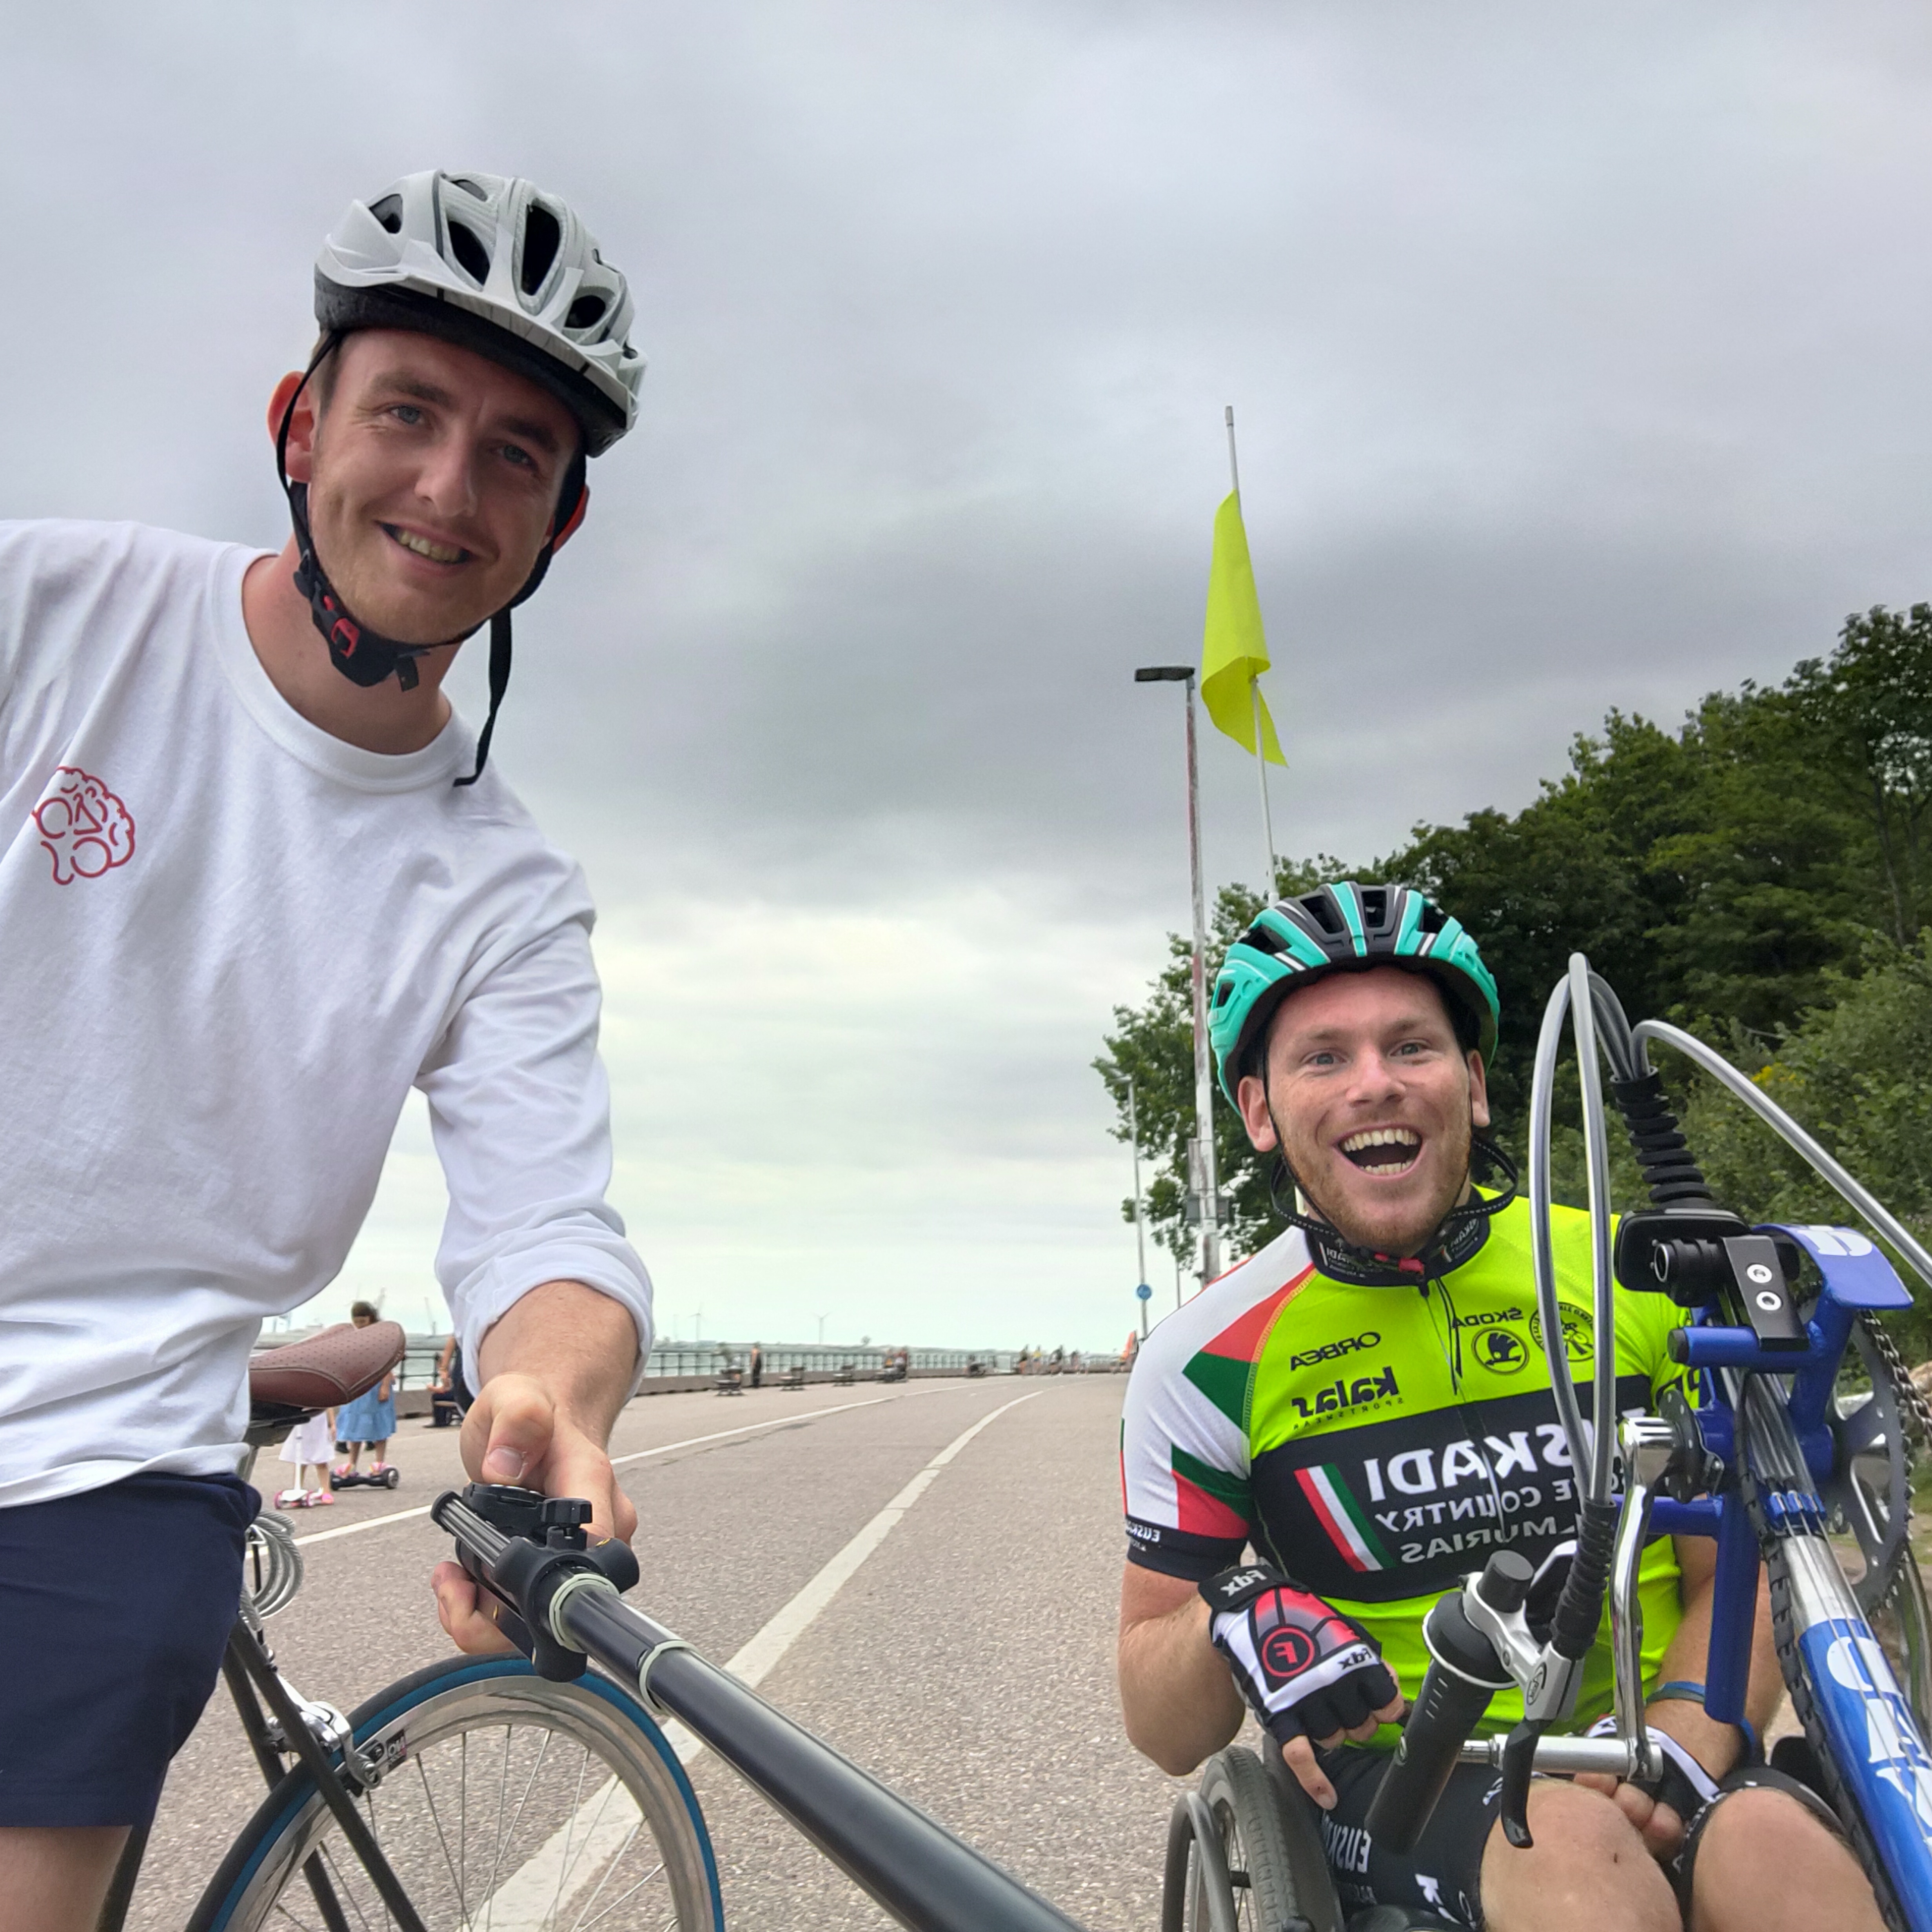 Picture of Harrison and his friend on a handcycle